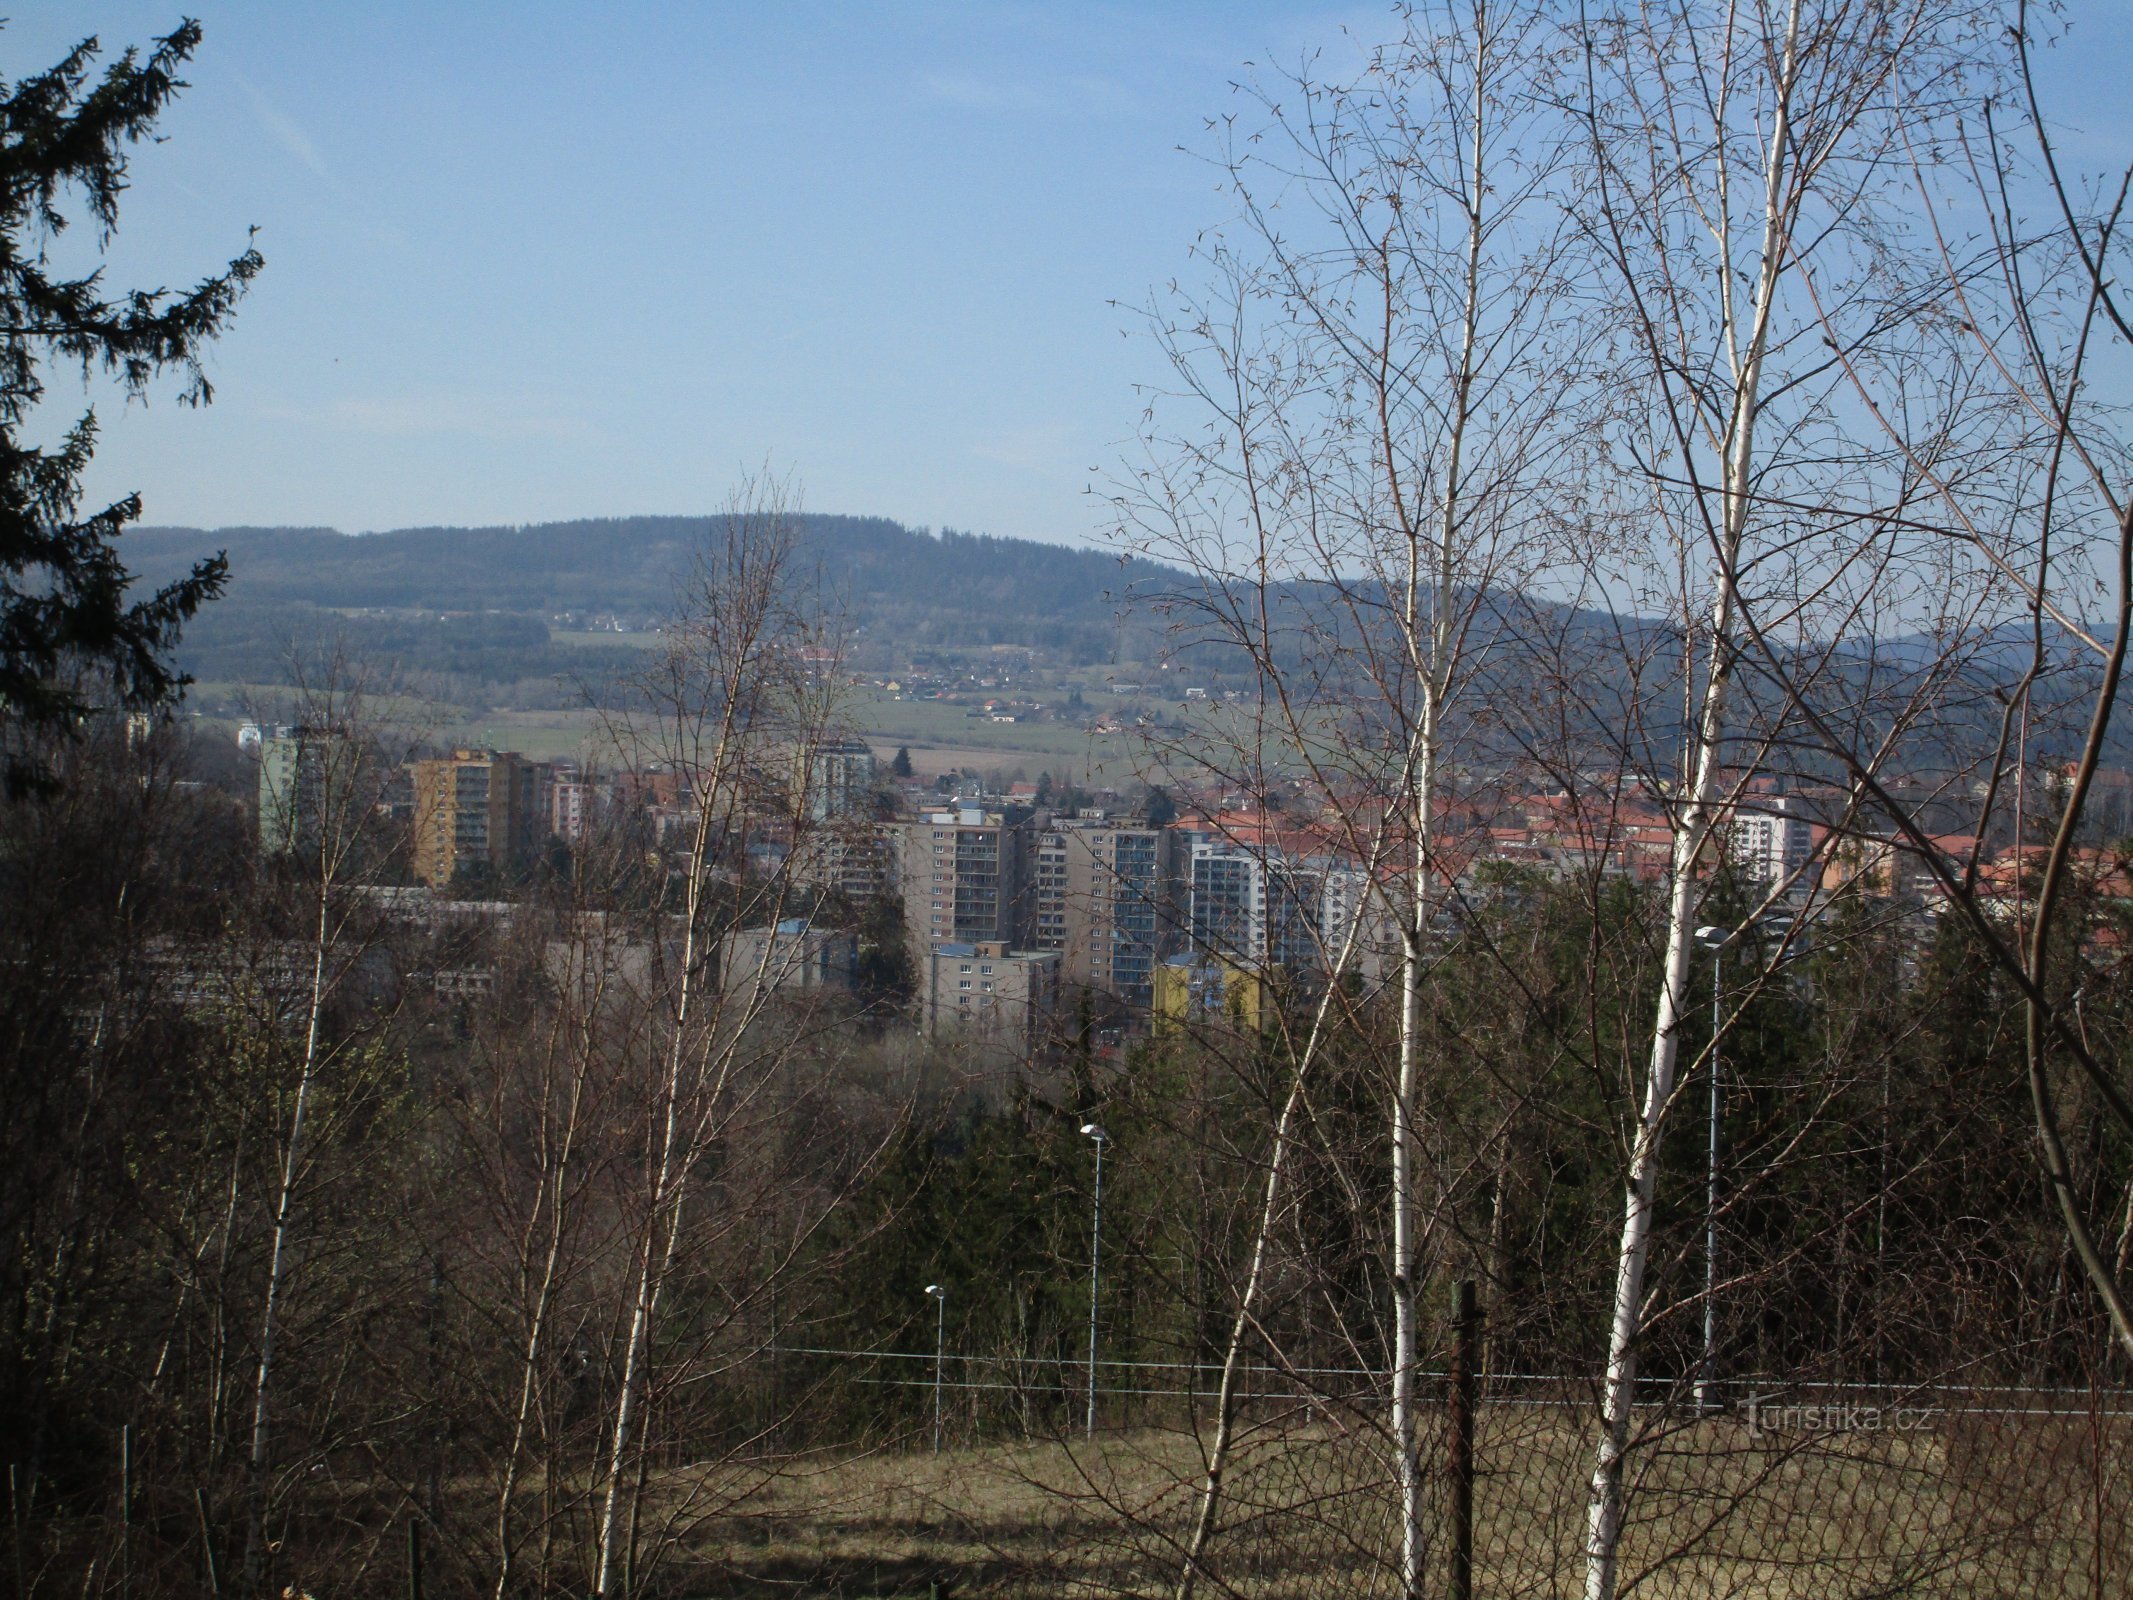 view of Příbram from the edge of the slope, the Třemošná massif in the background